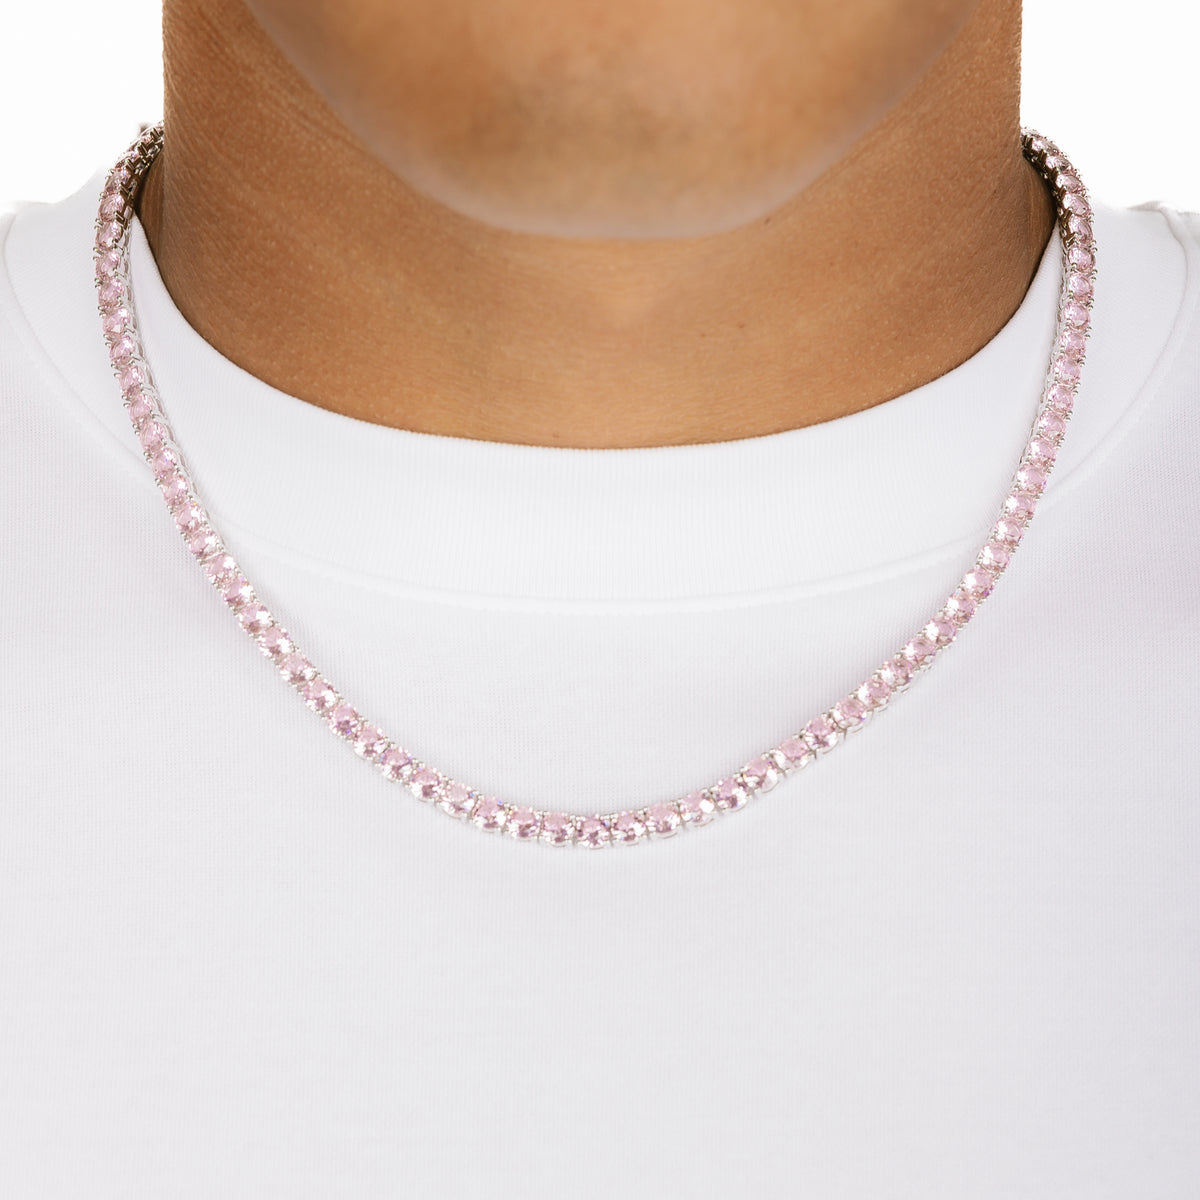 Amazon.com: Tennis Link Chain 5mm Necklace Round Cut Pink Sapphire 14k  White Gold Over .925 Sterling Silver One Row 16